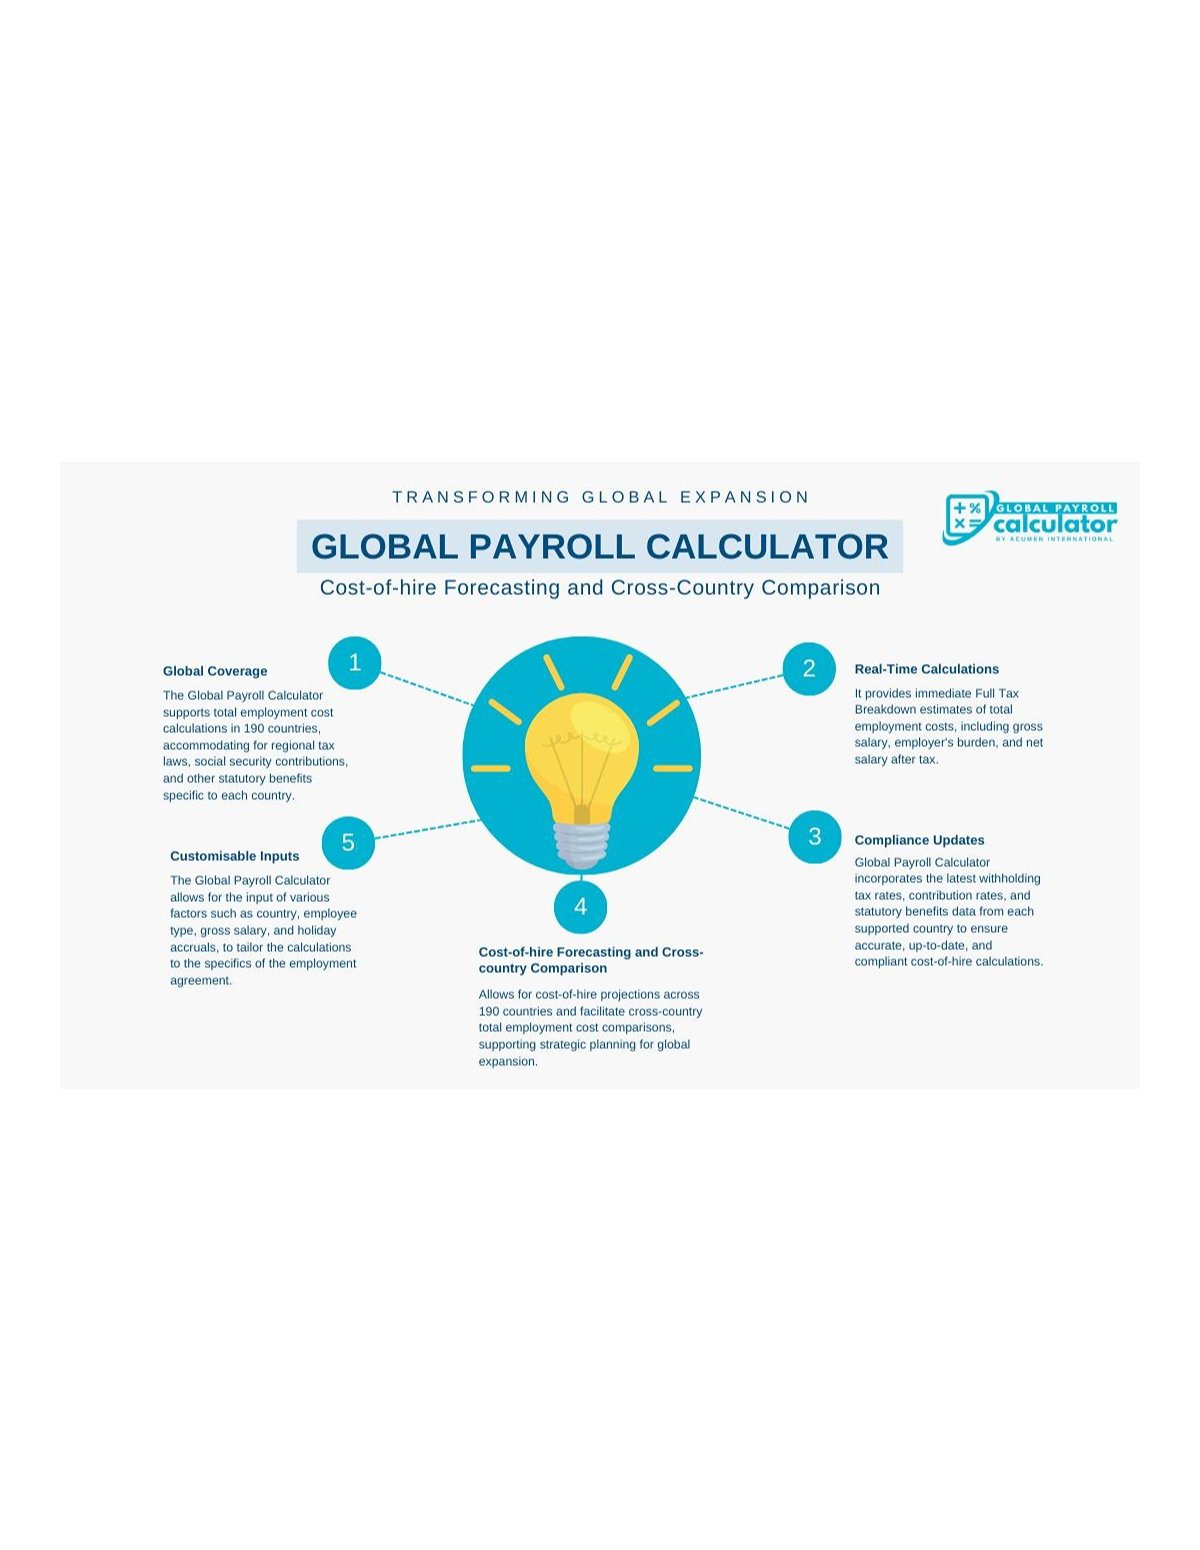 Build Your International Team with Global Payroll Calculator